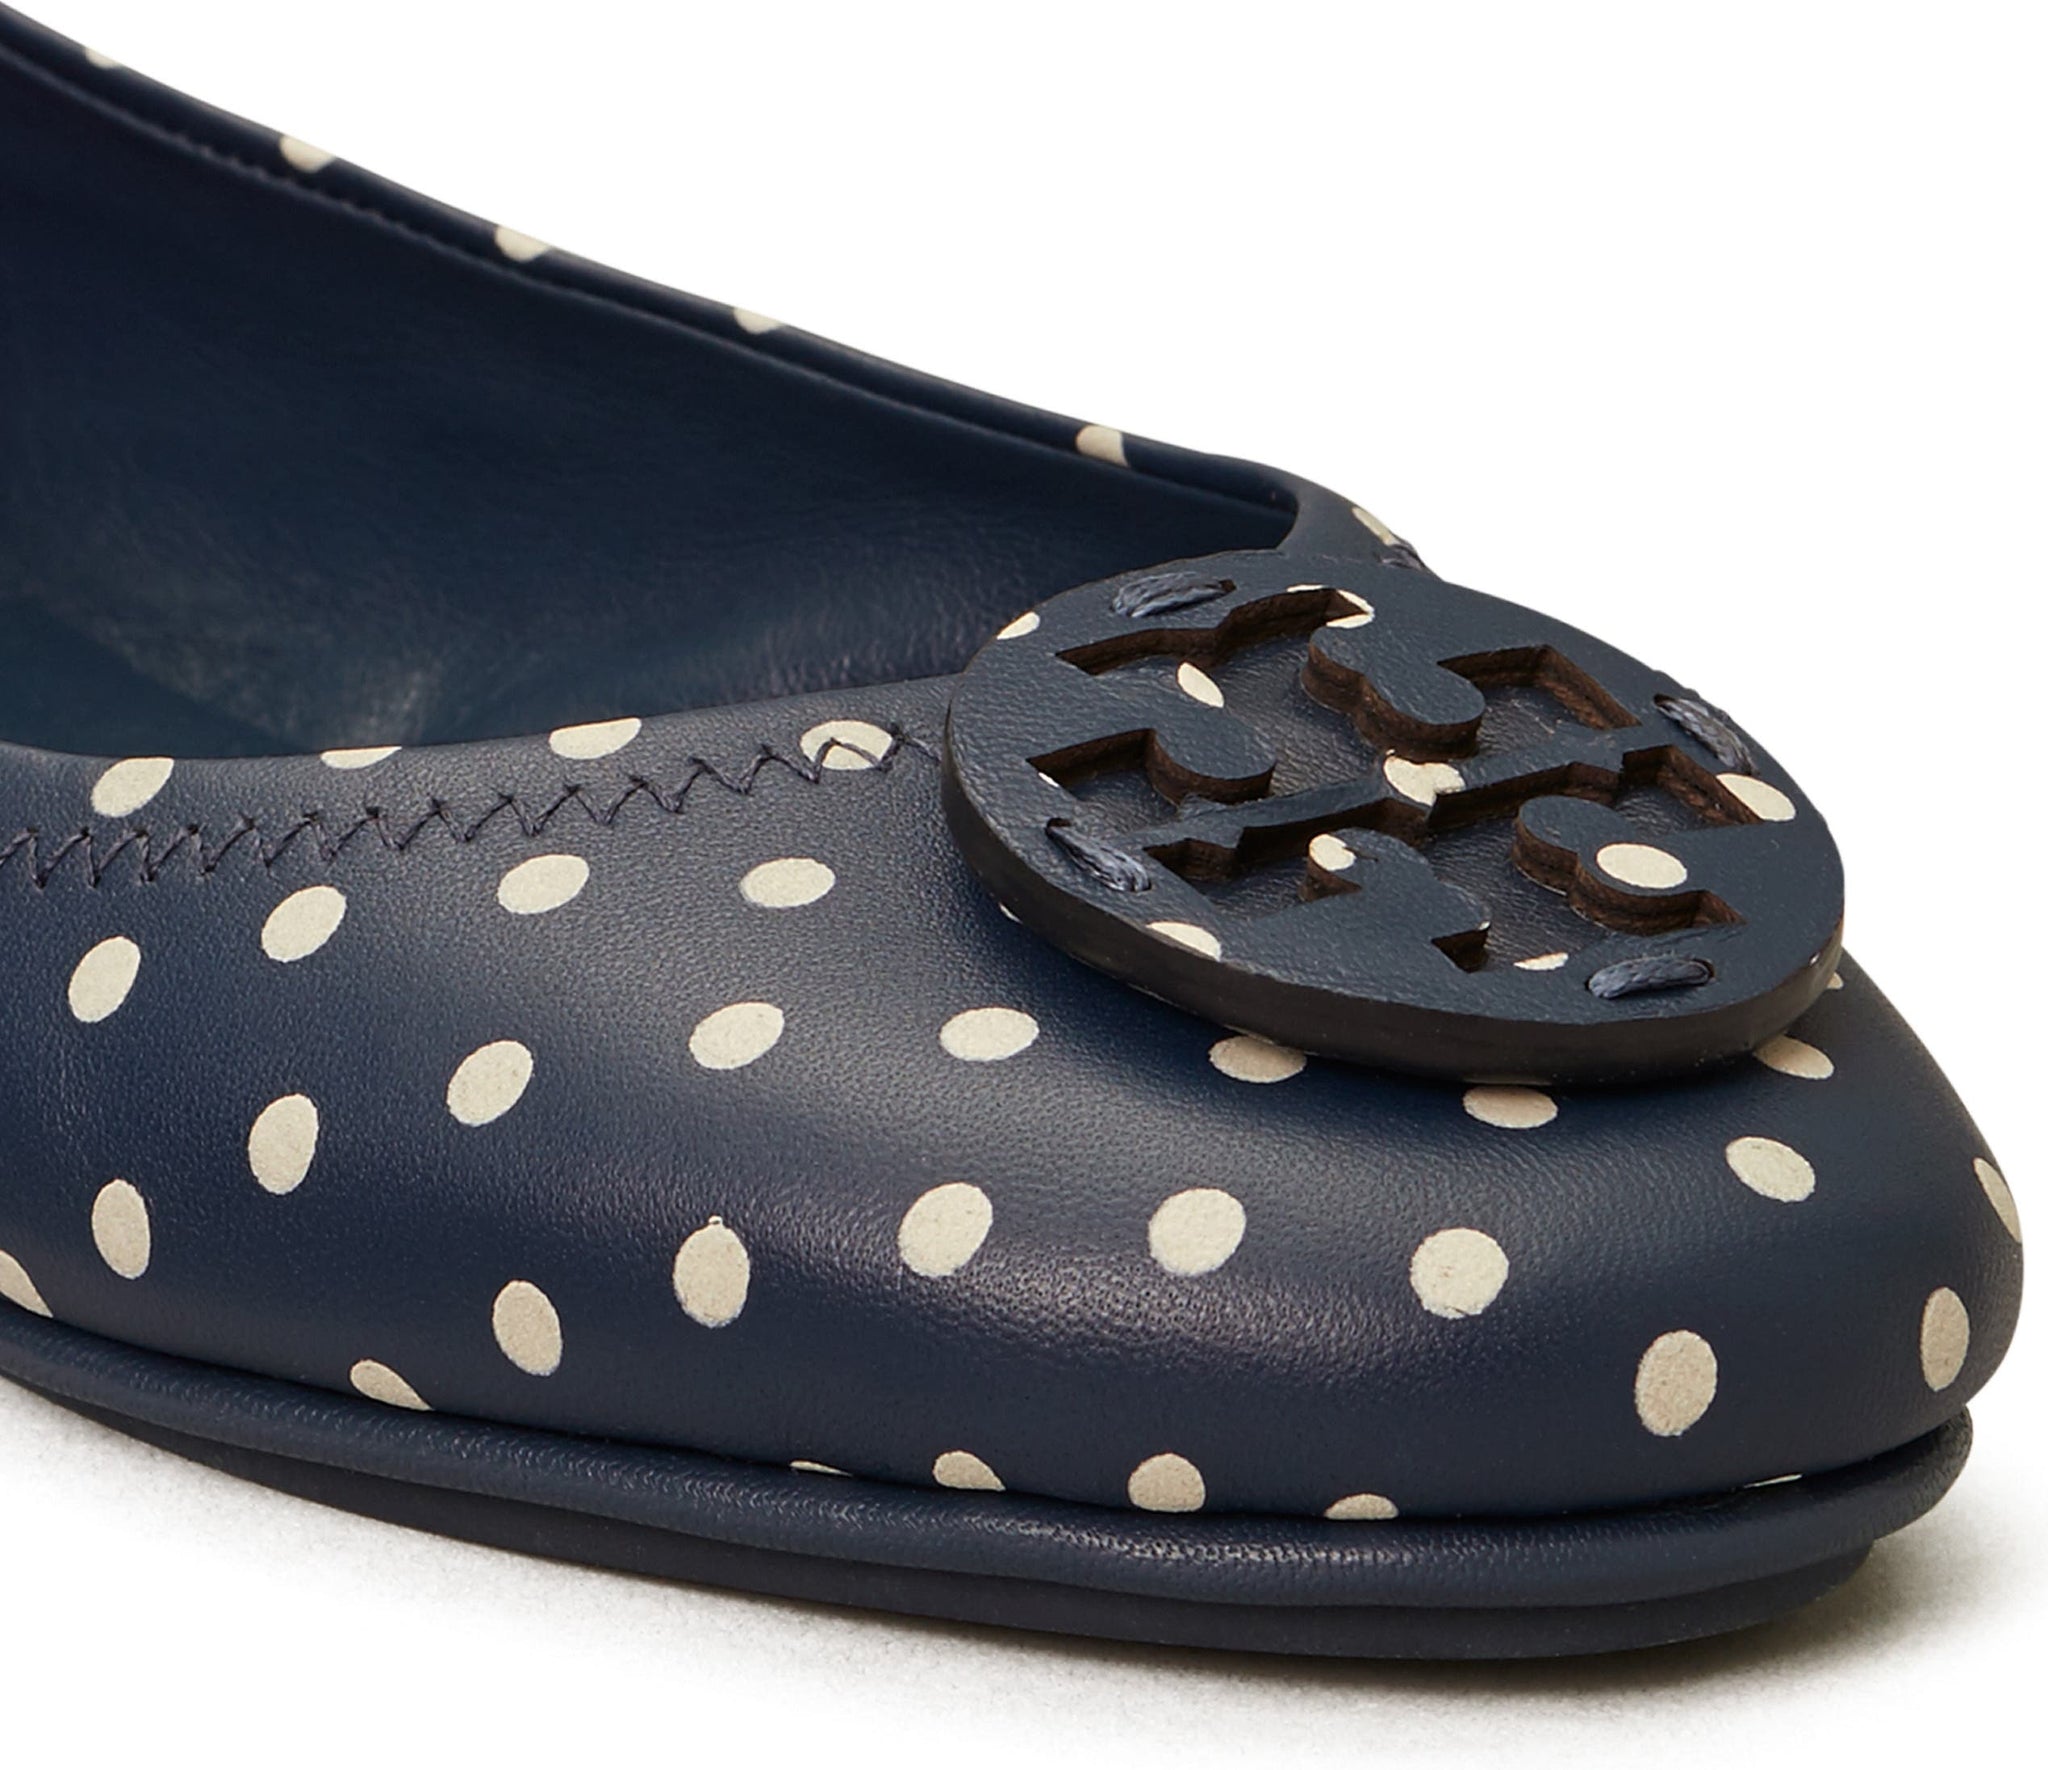 TORY BURCH Minnie Travel Ballet Flat, Alternate, color, CLASSIC DOTS NAVY